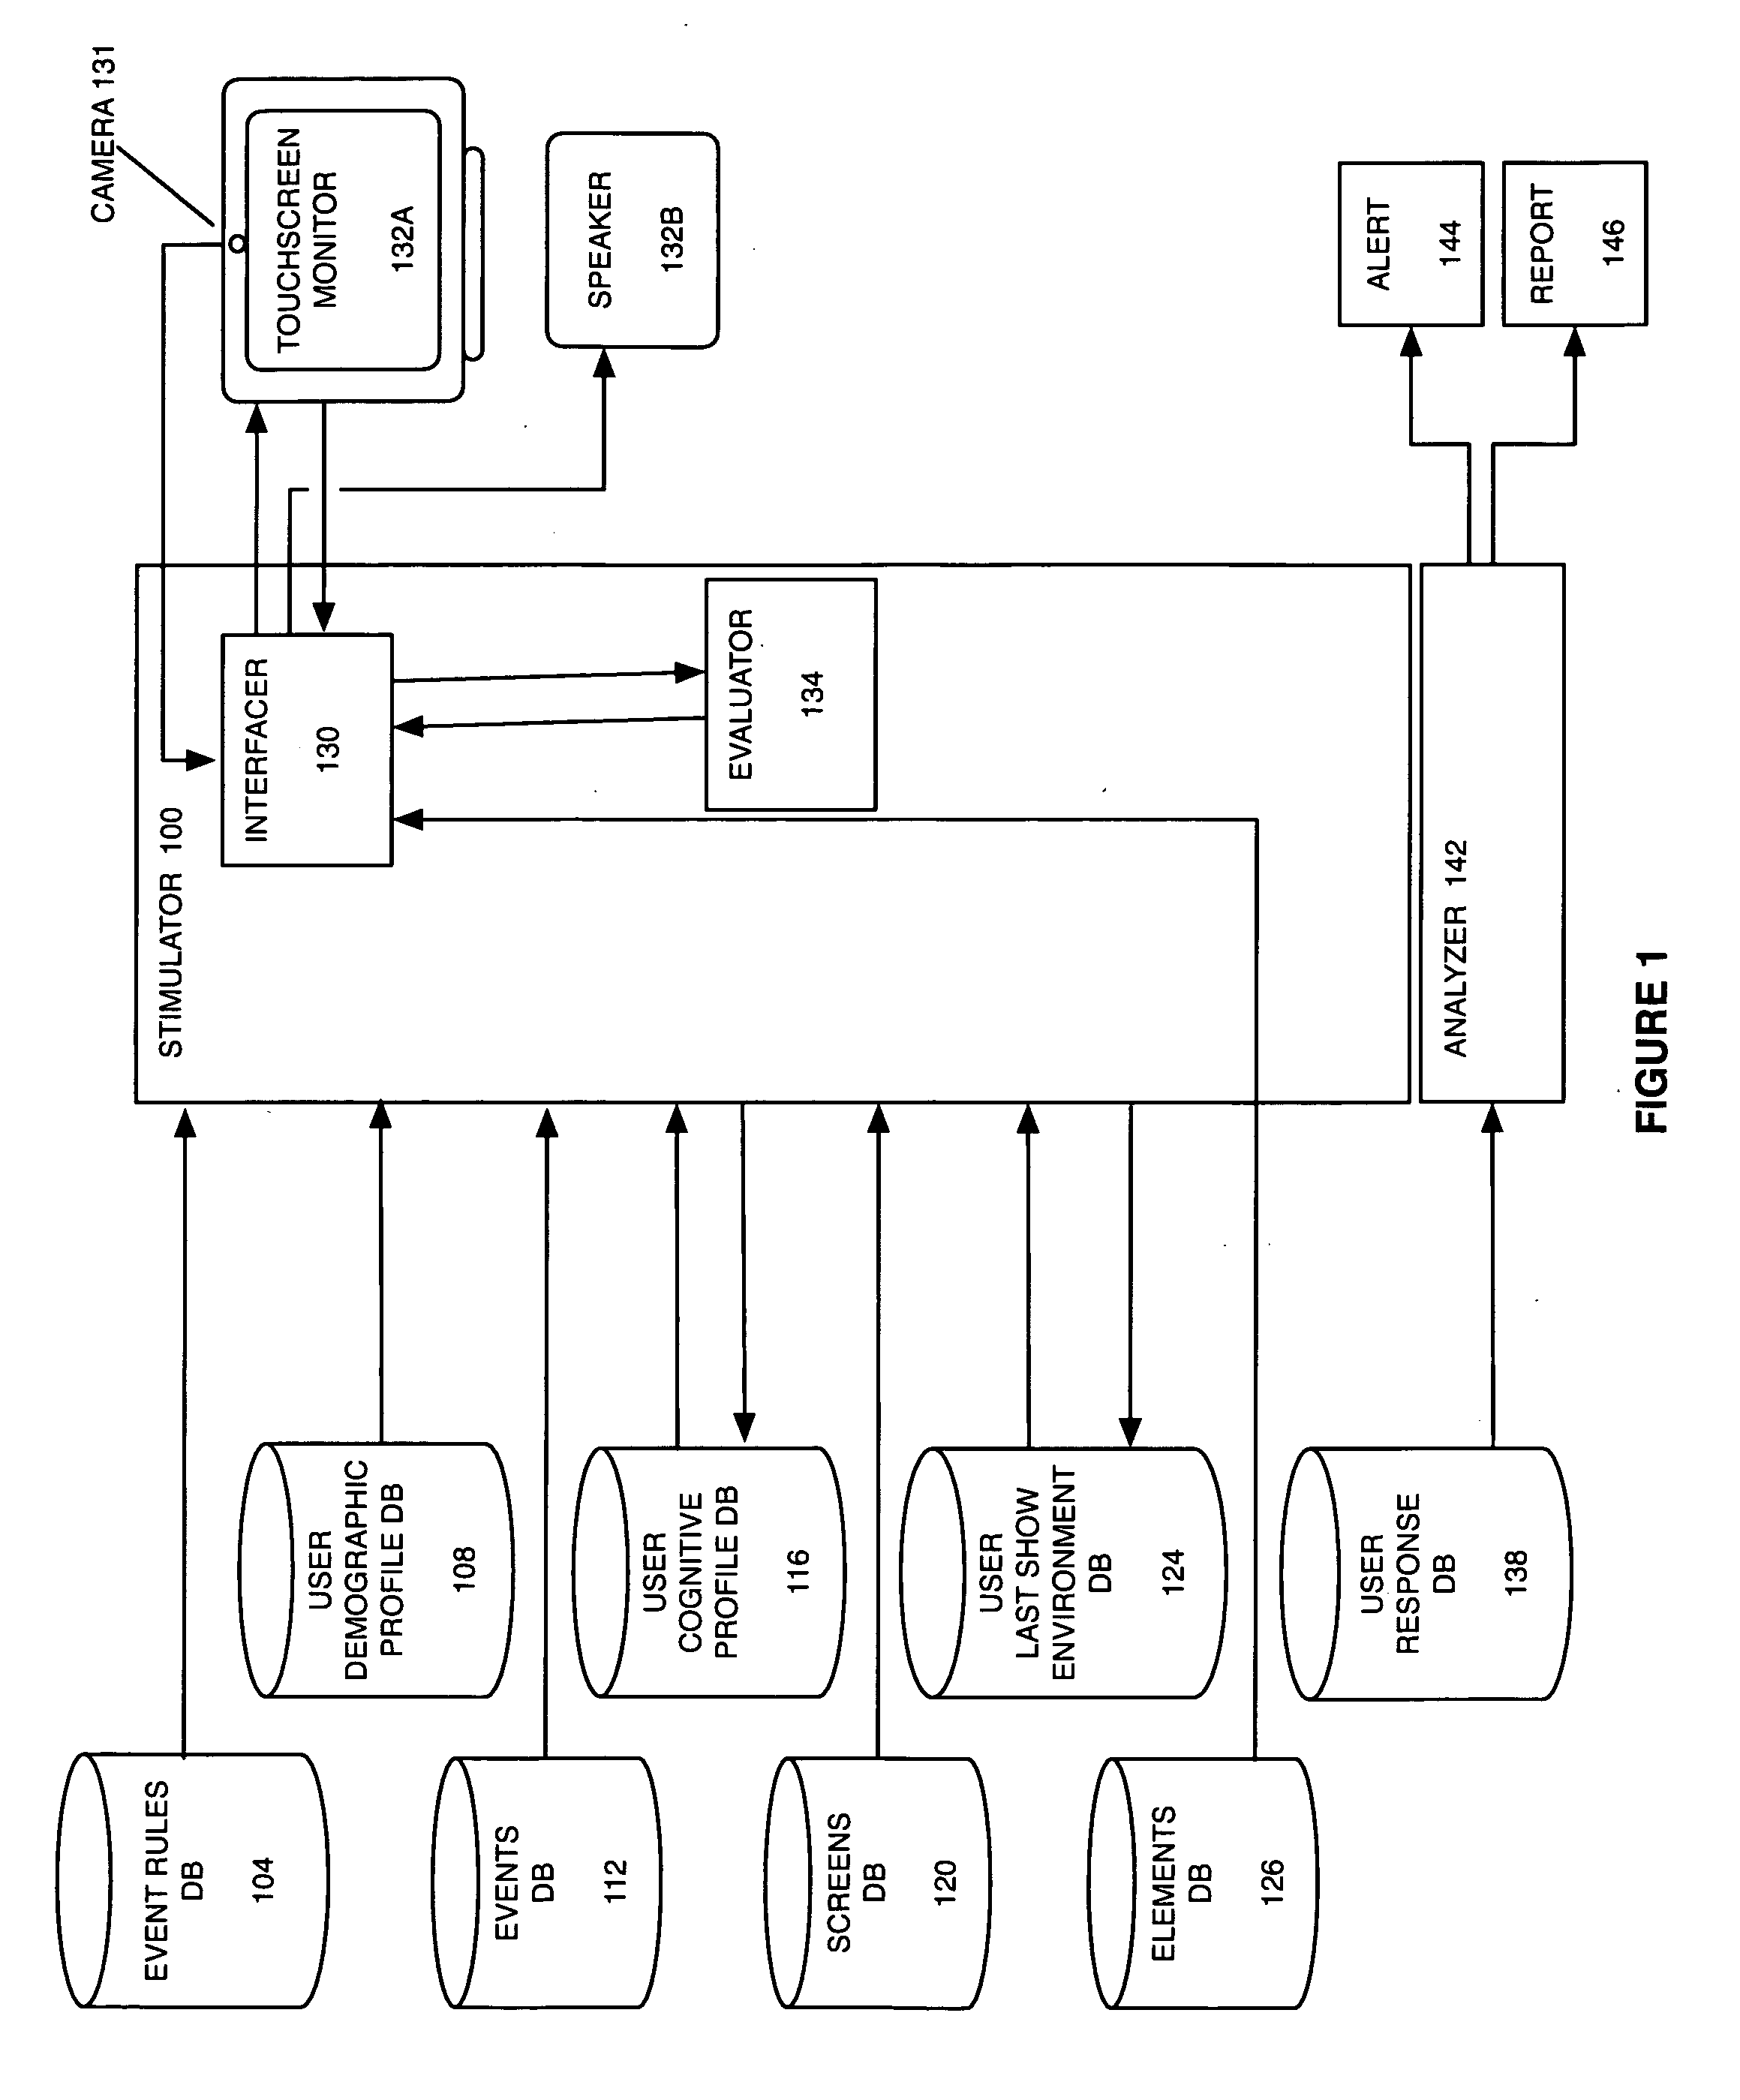 Method and system for providing adaptive rule based cognitive stimulation to a user